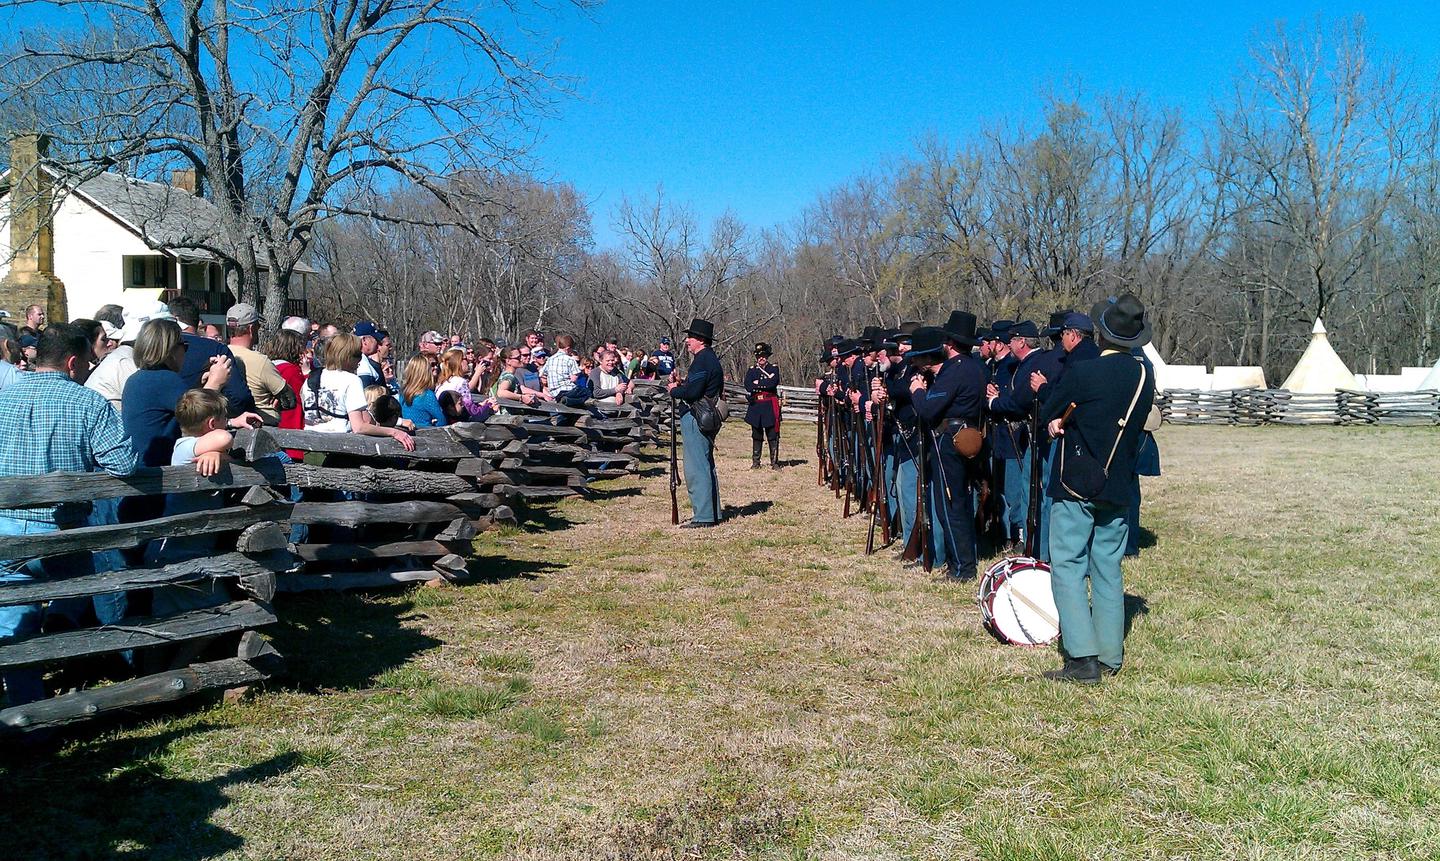 Union Infantry 150thPhoto of Union Infantrymen reenactors standing in front of the Elkhorn Tavern, with large crowd during demonstration on the 150th anniversary of the Battle of Pea Ridge. .